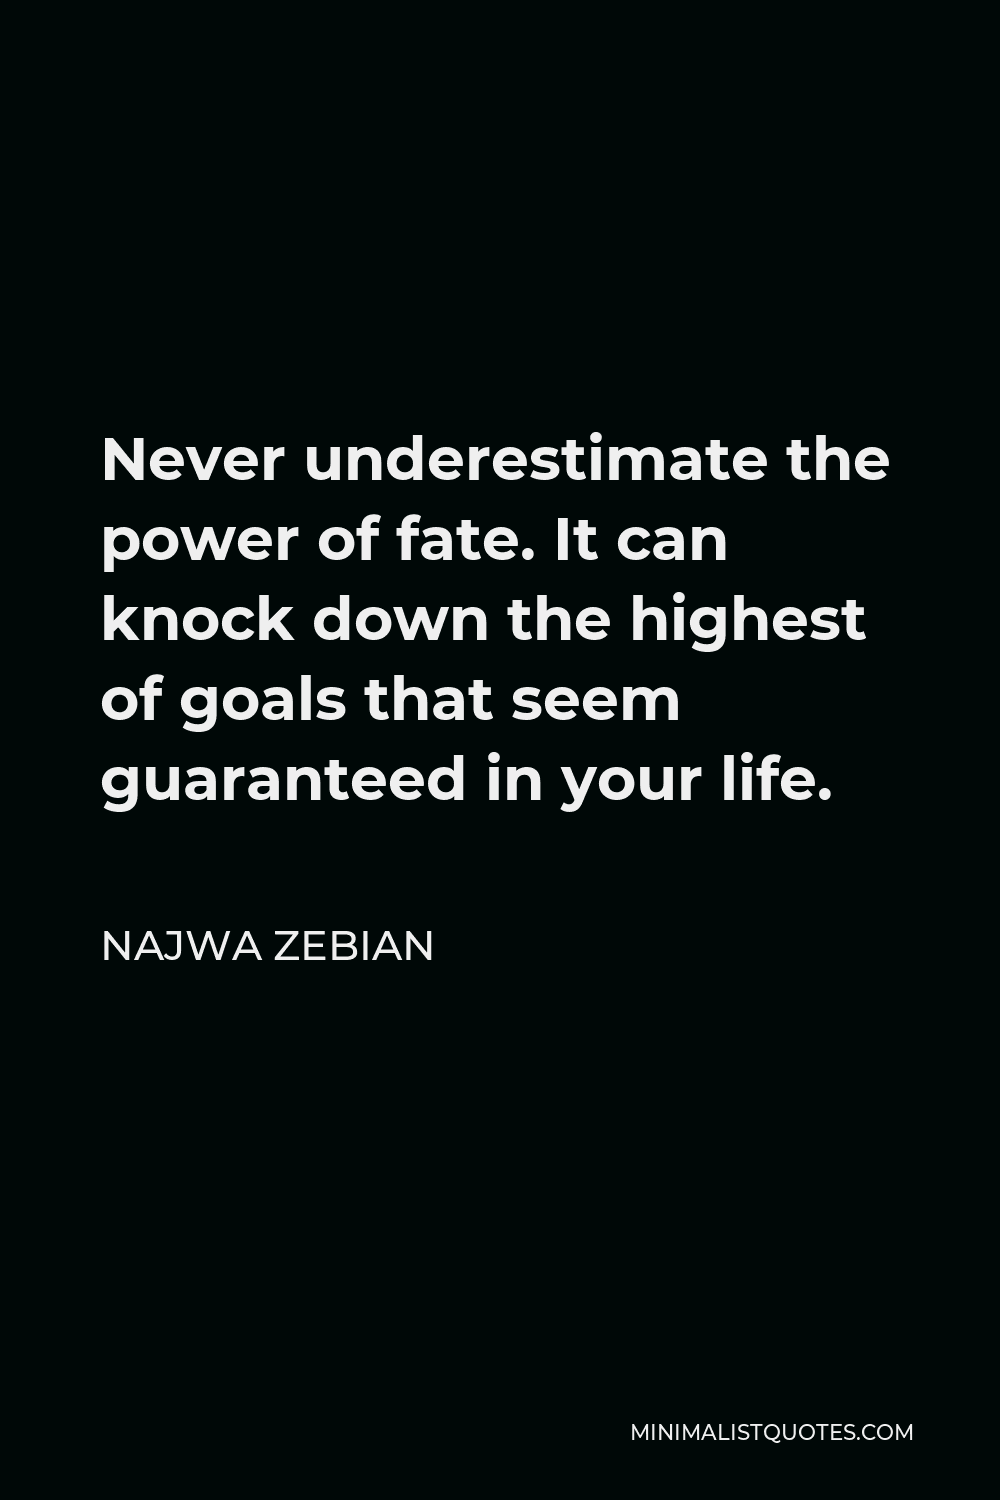 Najwa Zebian Quote - Never underestimate the power of fate. It can knock down the highest of goals that seem guaranteed in your life.